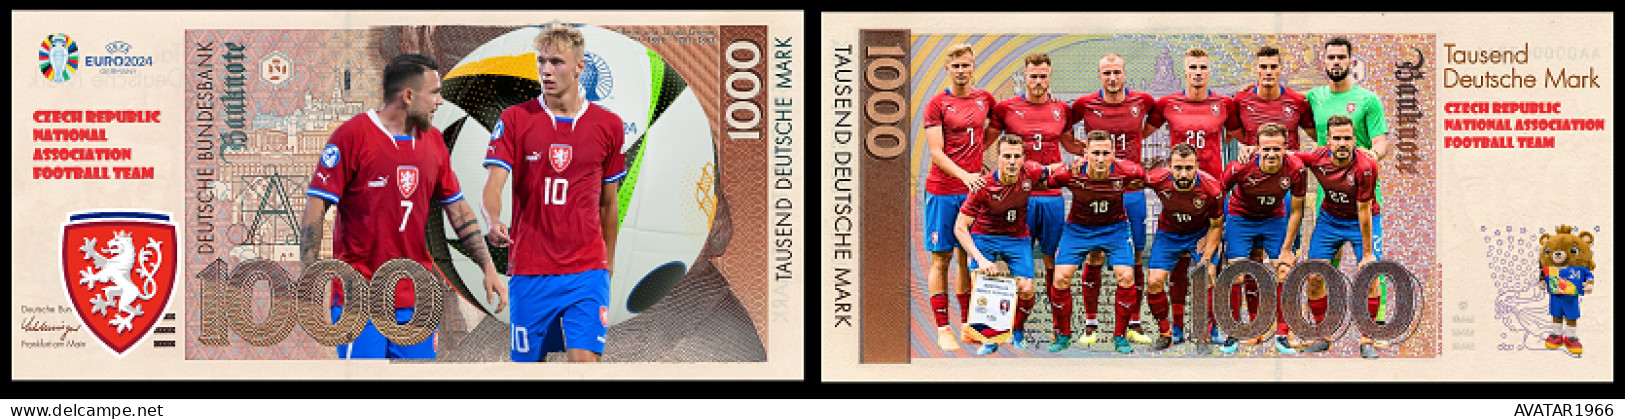 UEFA European Football Championship 2024 qualified country   Czech Republic 8 pieces Germany fantasy paper money